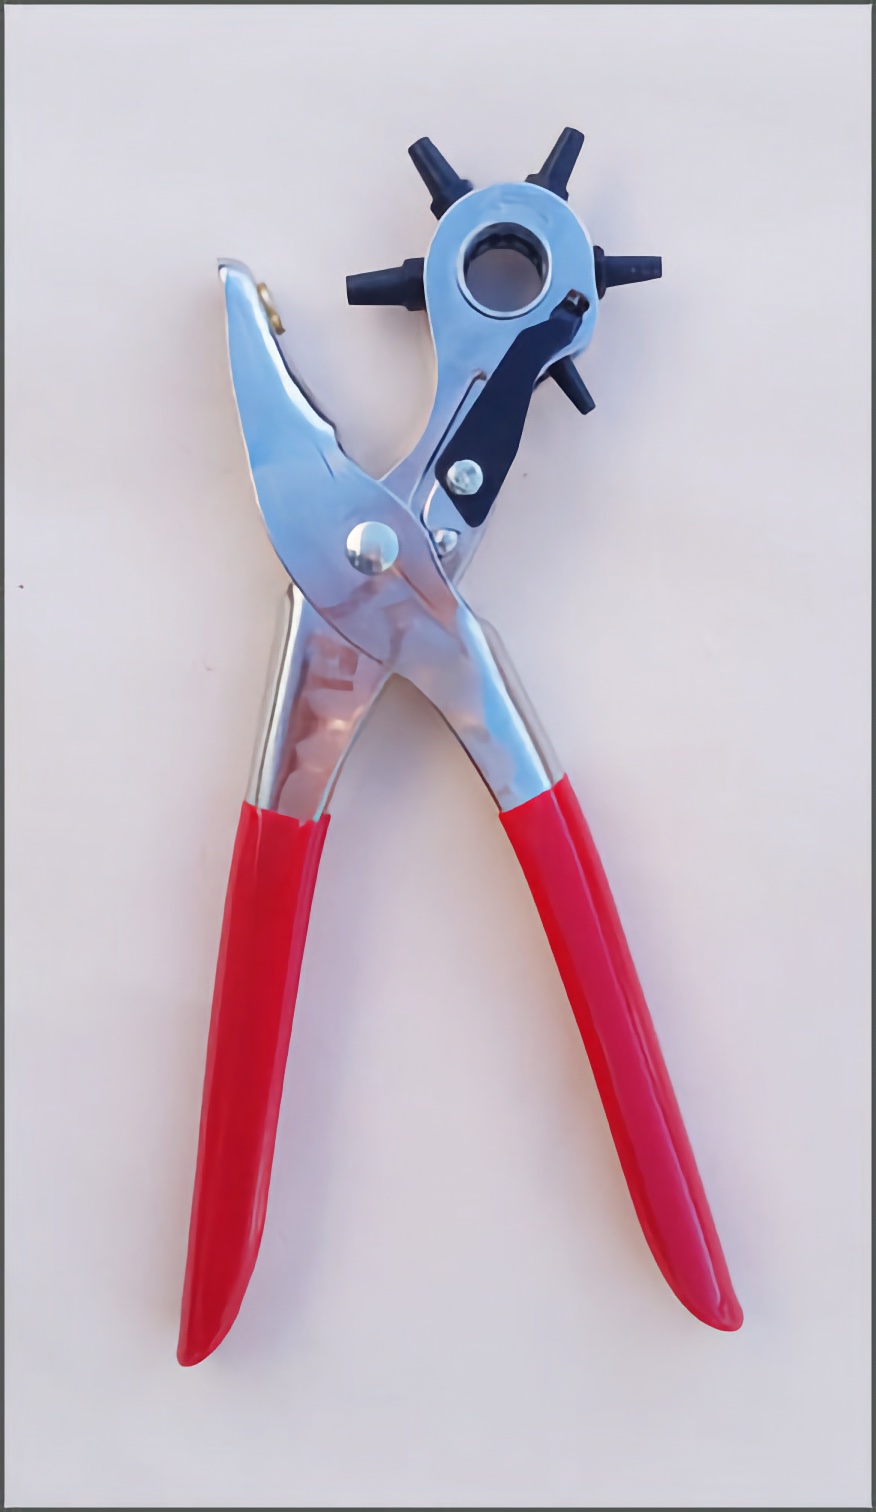 HOW TO USE HOLE PUNCHER/ PROFESSIONAL PUNCH PLIER FOR LEATHER